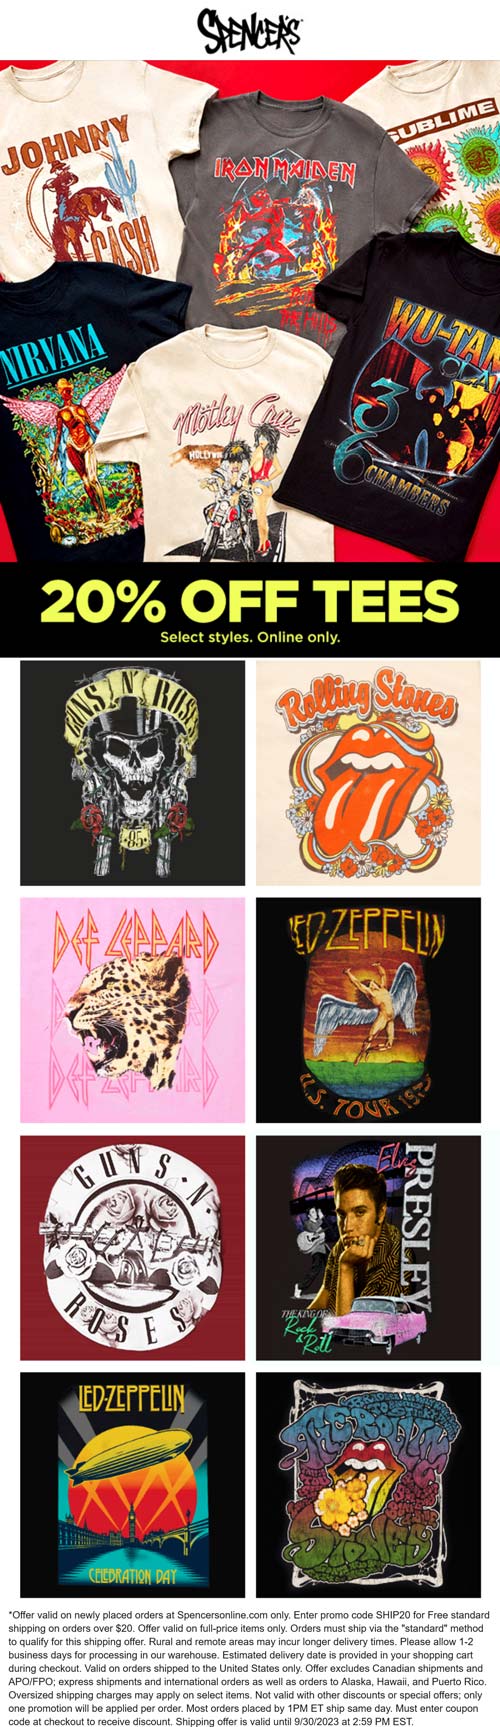 Spencers stores Coupon  20% off band tees online at Spencers #spencers 